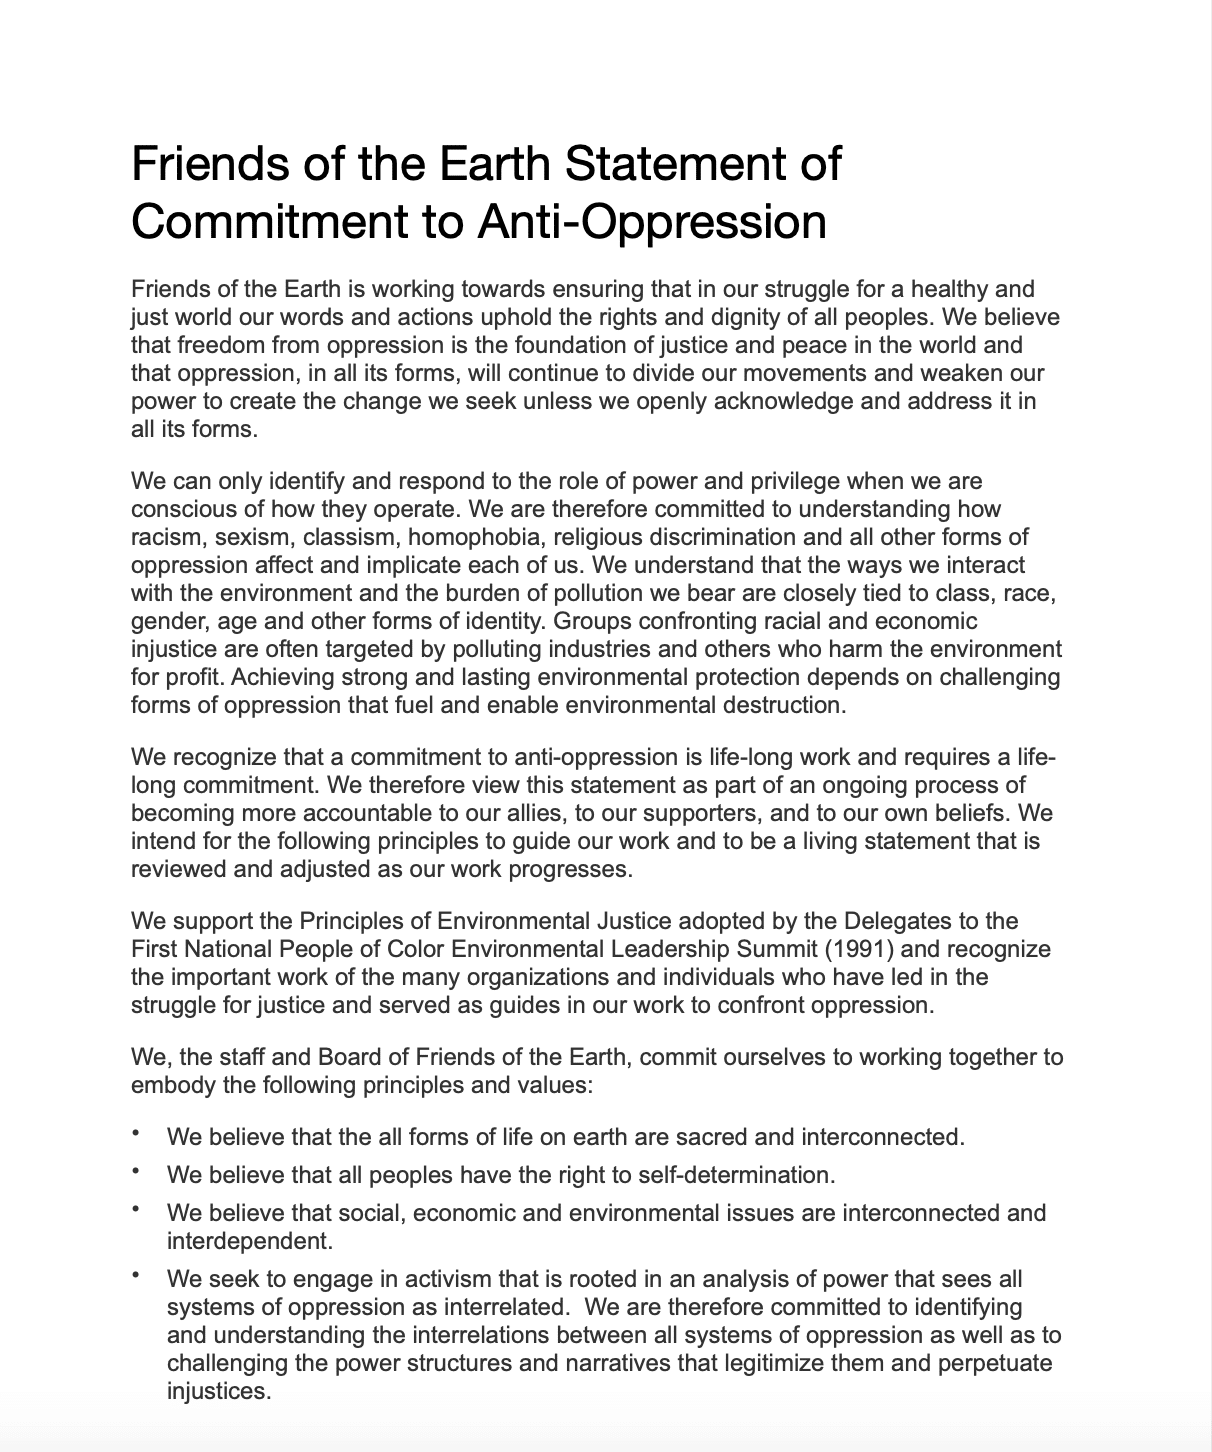 Friends of the Earth Statement of Commitment to Anti-Oppression